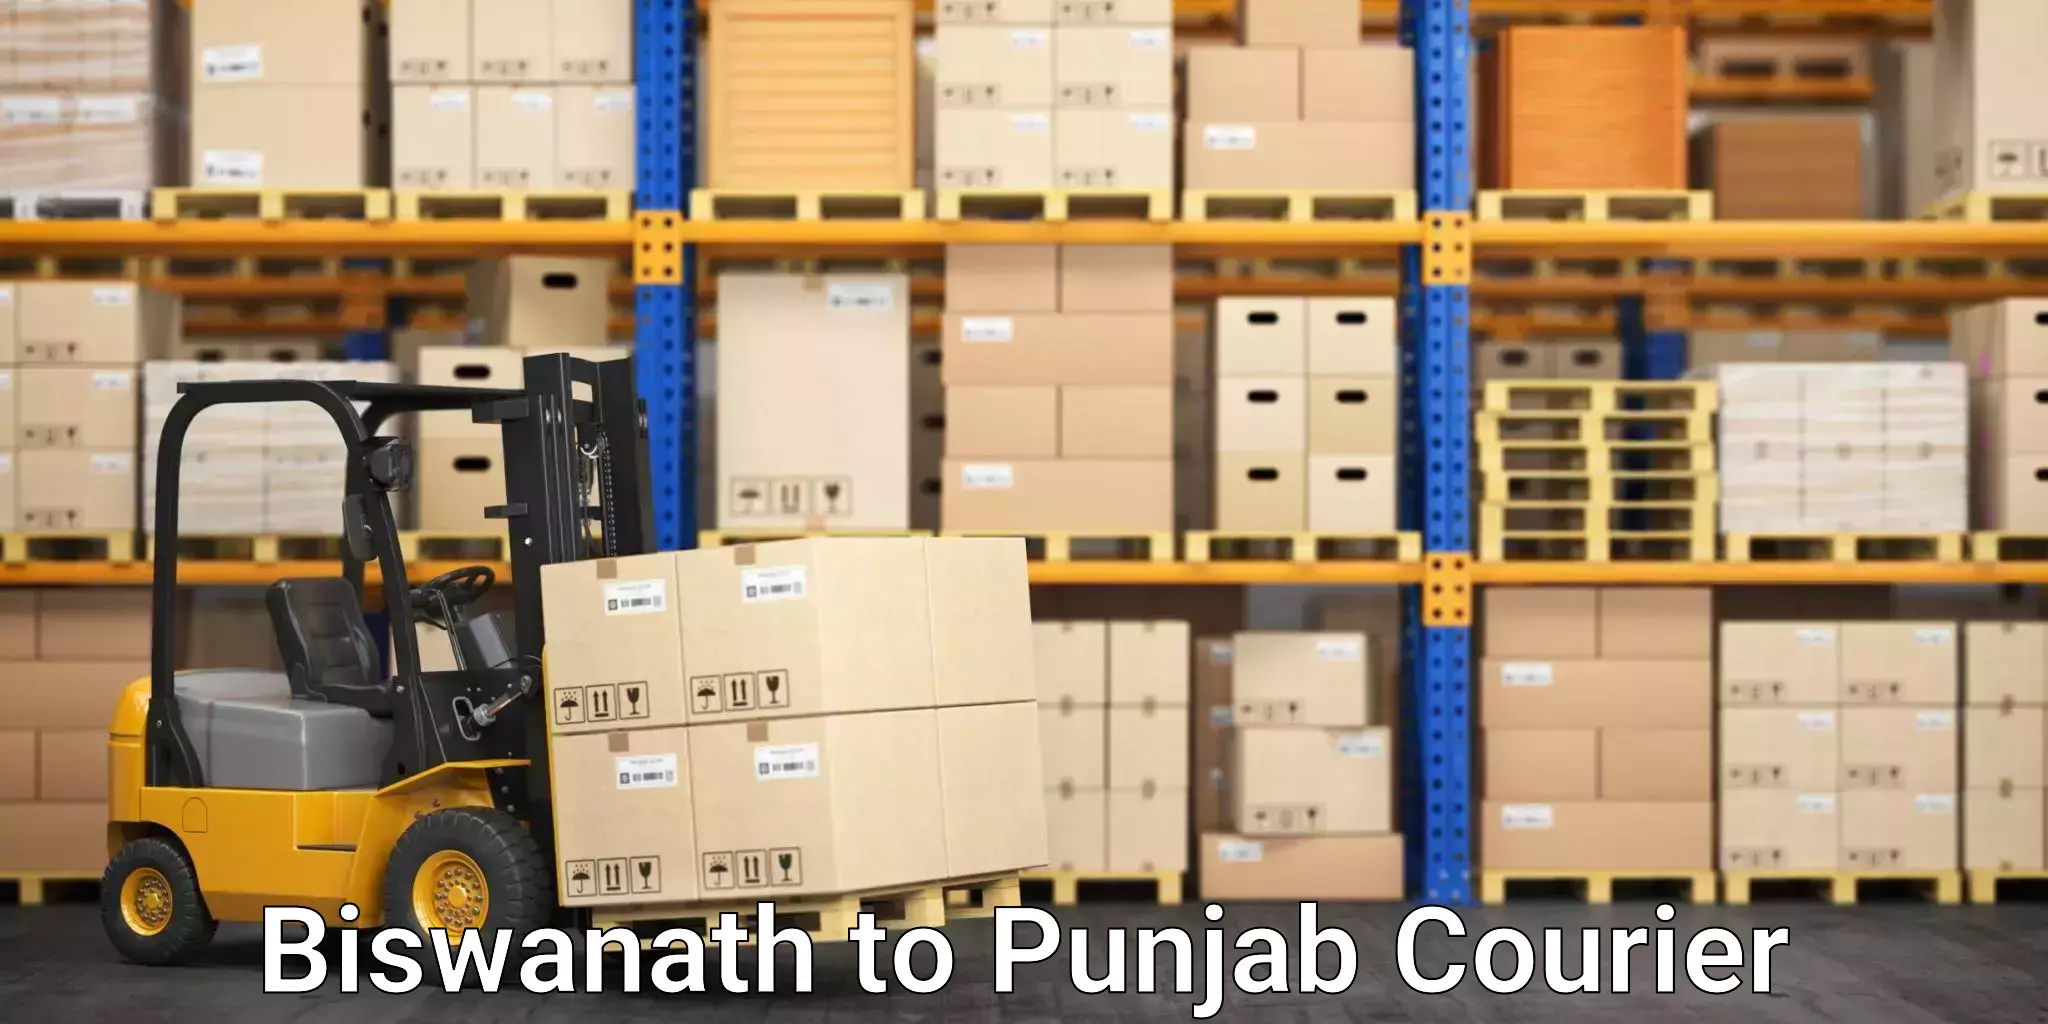 Secure shipping methods Biswanath to Batala